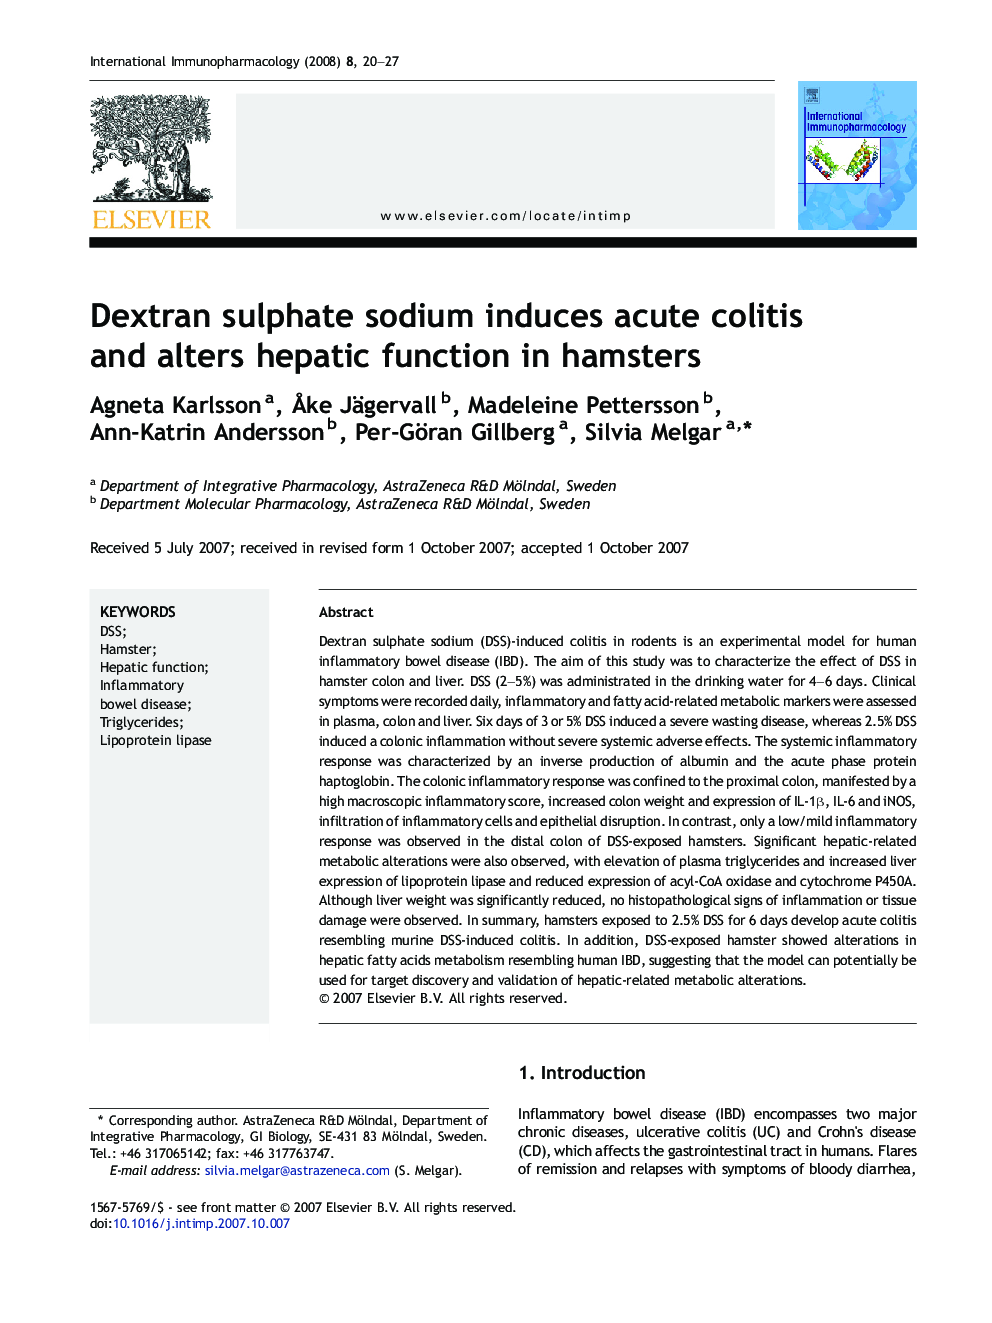 Dextran sulphate sodium induces acute colitis and alters hepatic function in hamsters